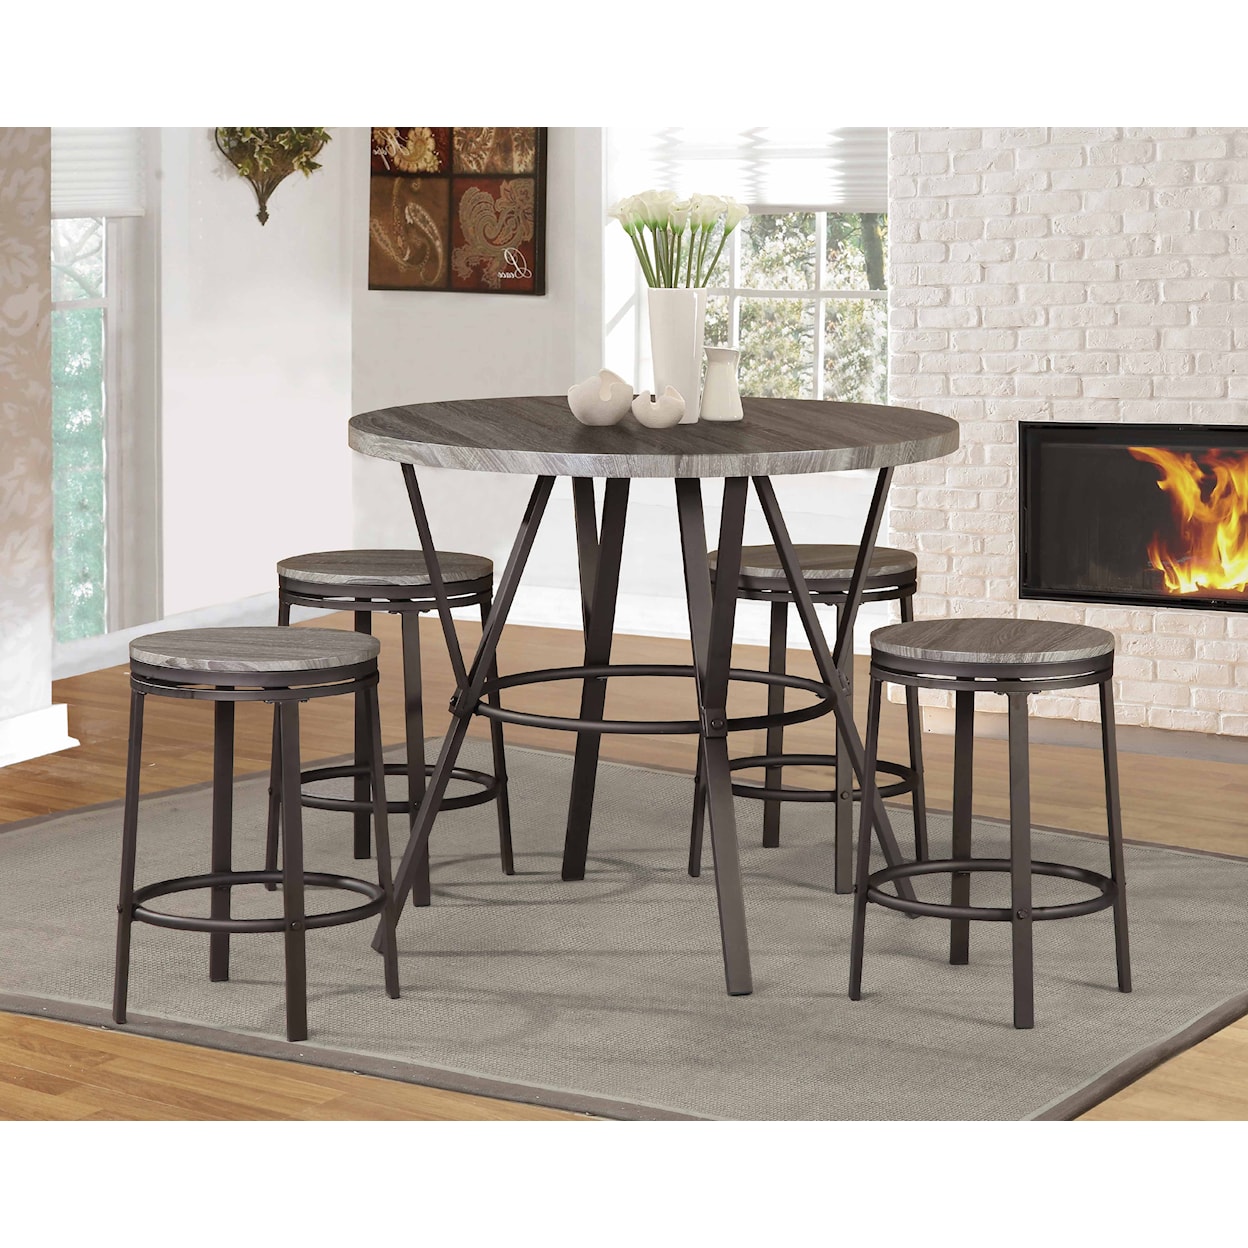 Milton Greens Stars Counter Height Dining EUGENE NATURAL 5 PIECE PUB SET |